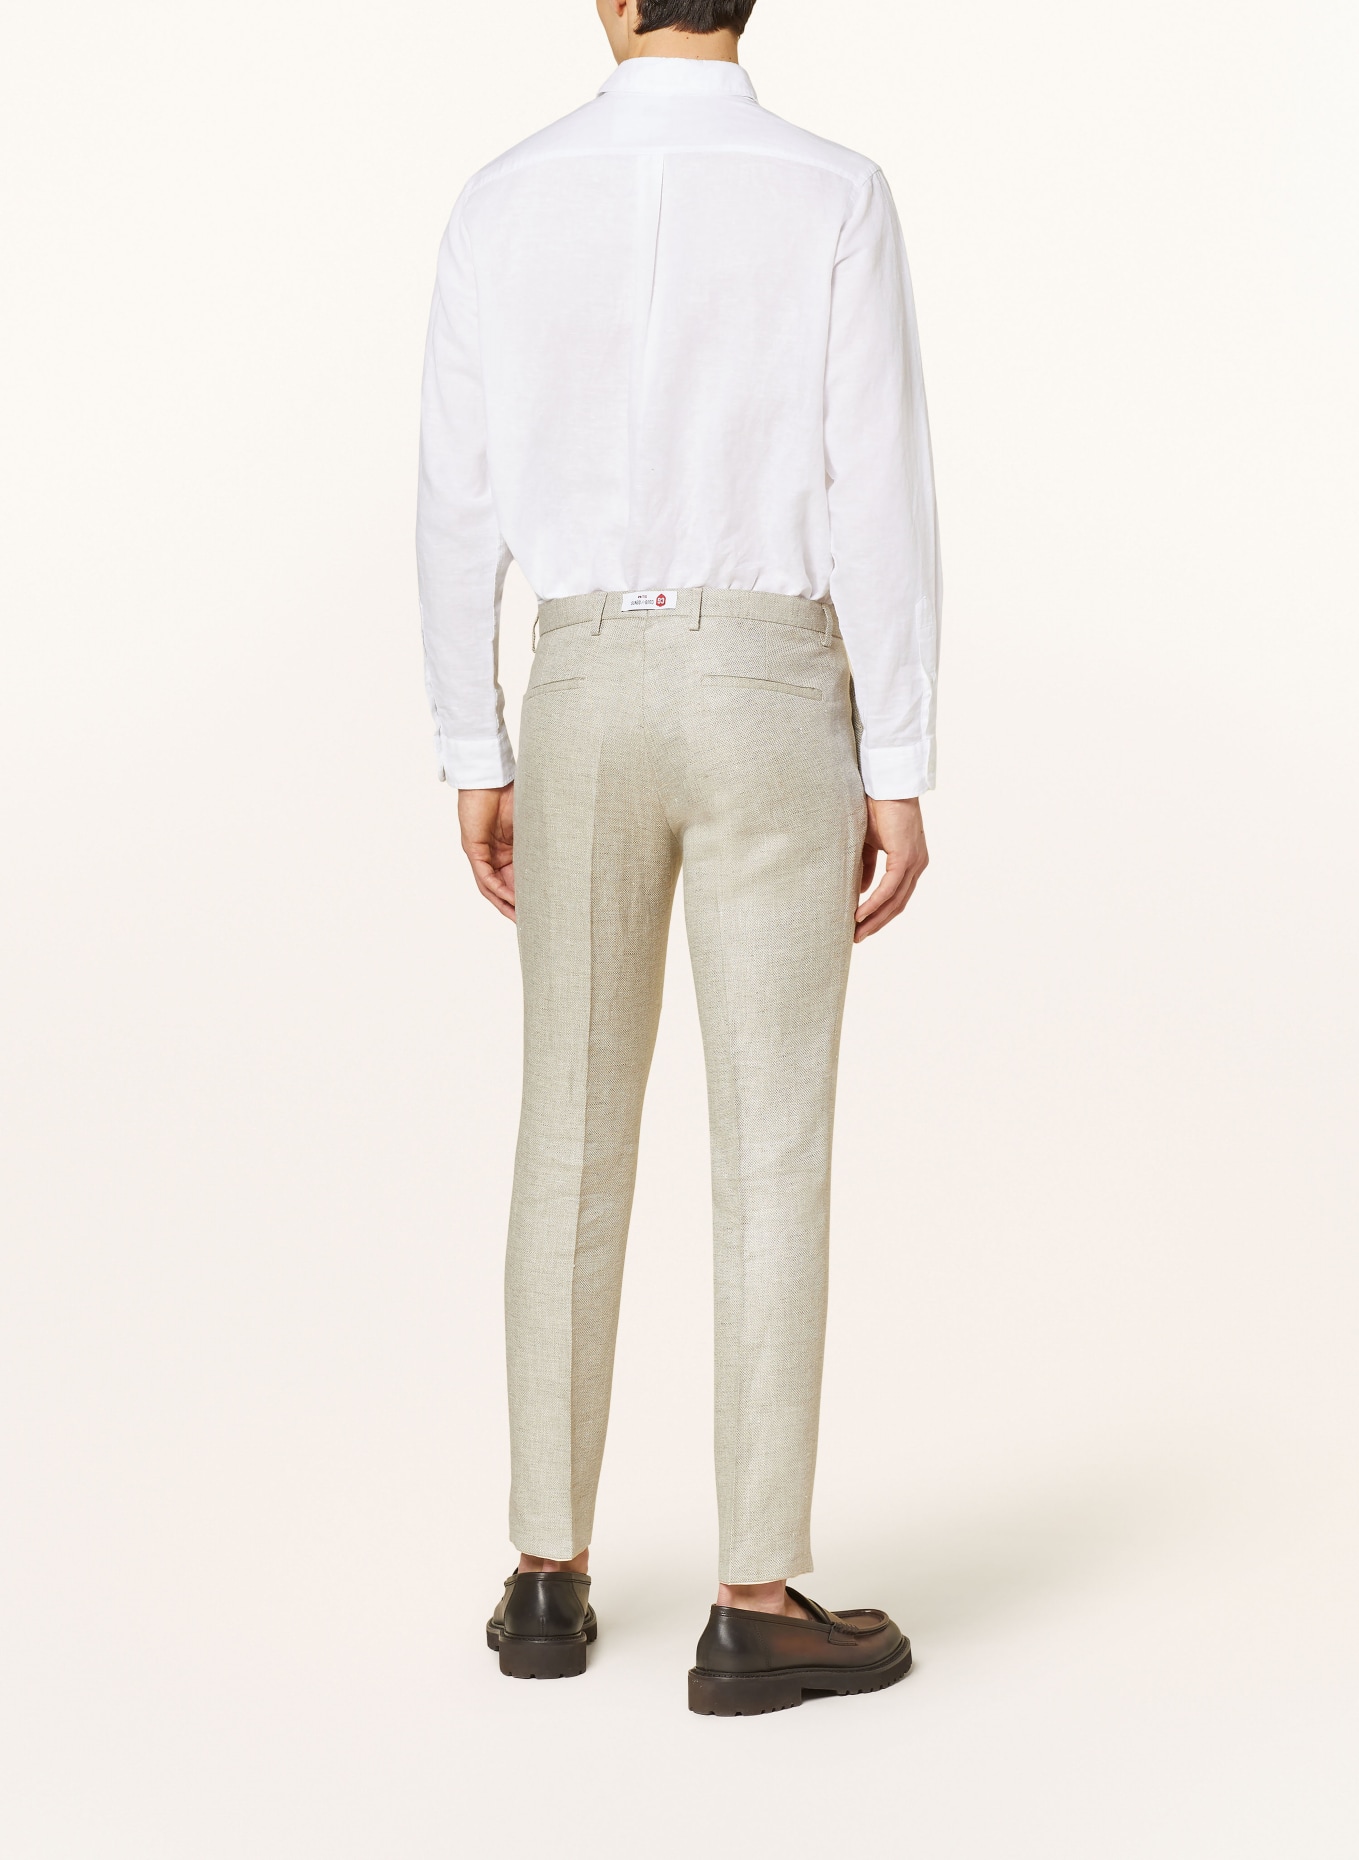 CG - CLUB of GENTS Suit trousers CG PACO slim fit with linen, Color: 21 beige hell (Image 4)